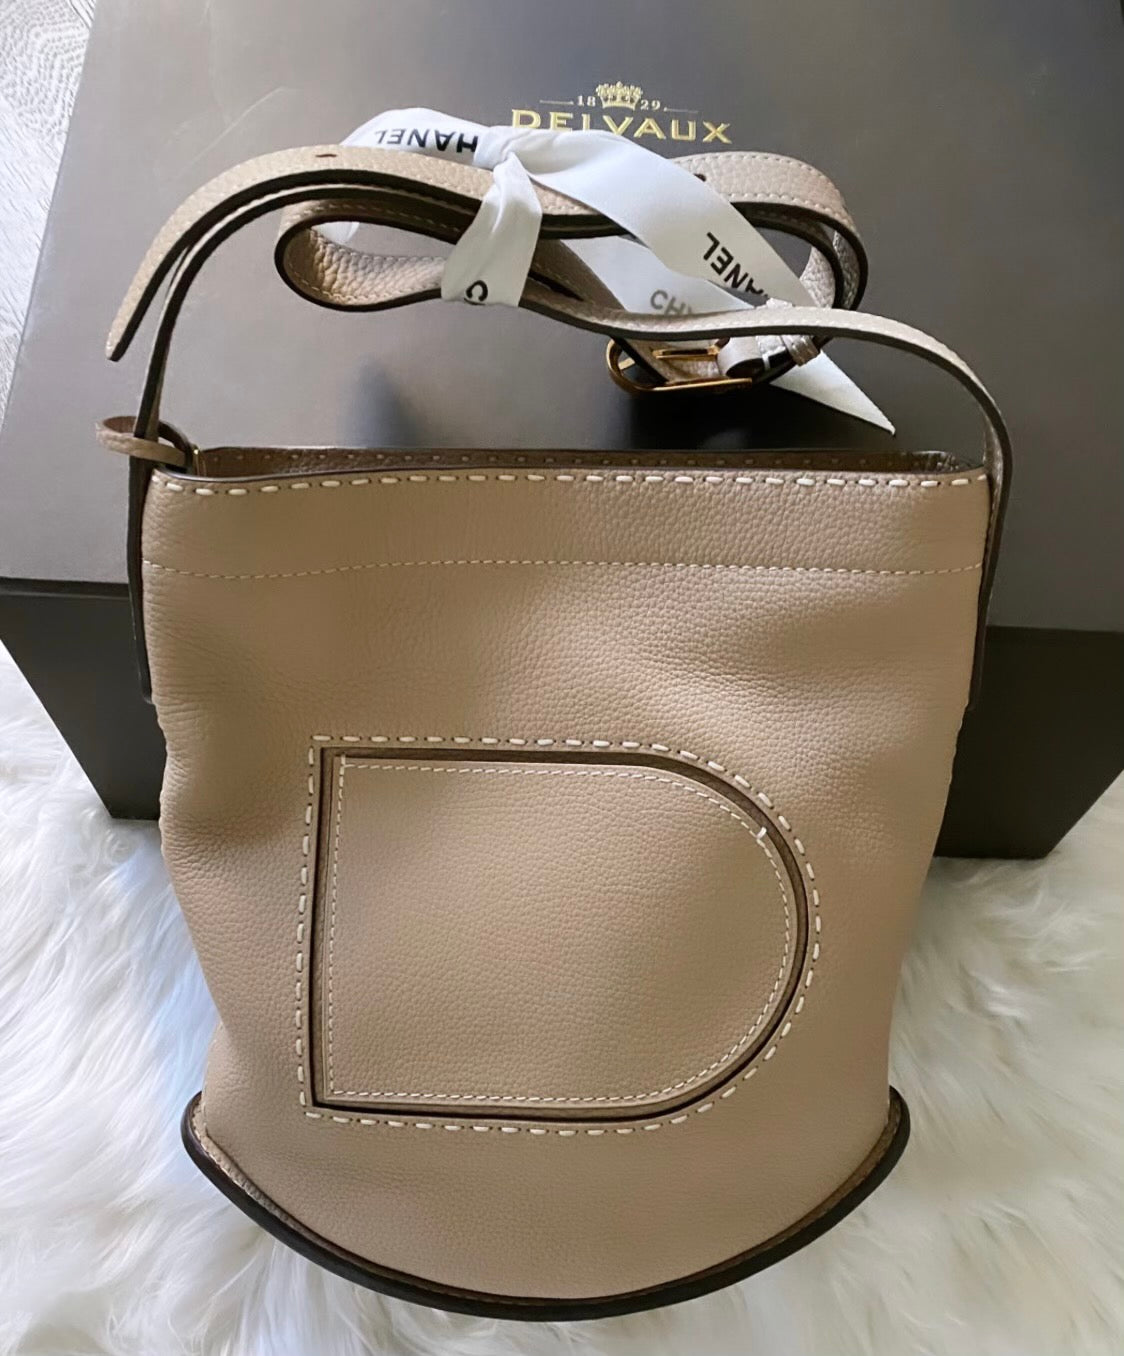 Delvaux Authenticated Pin Handbag